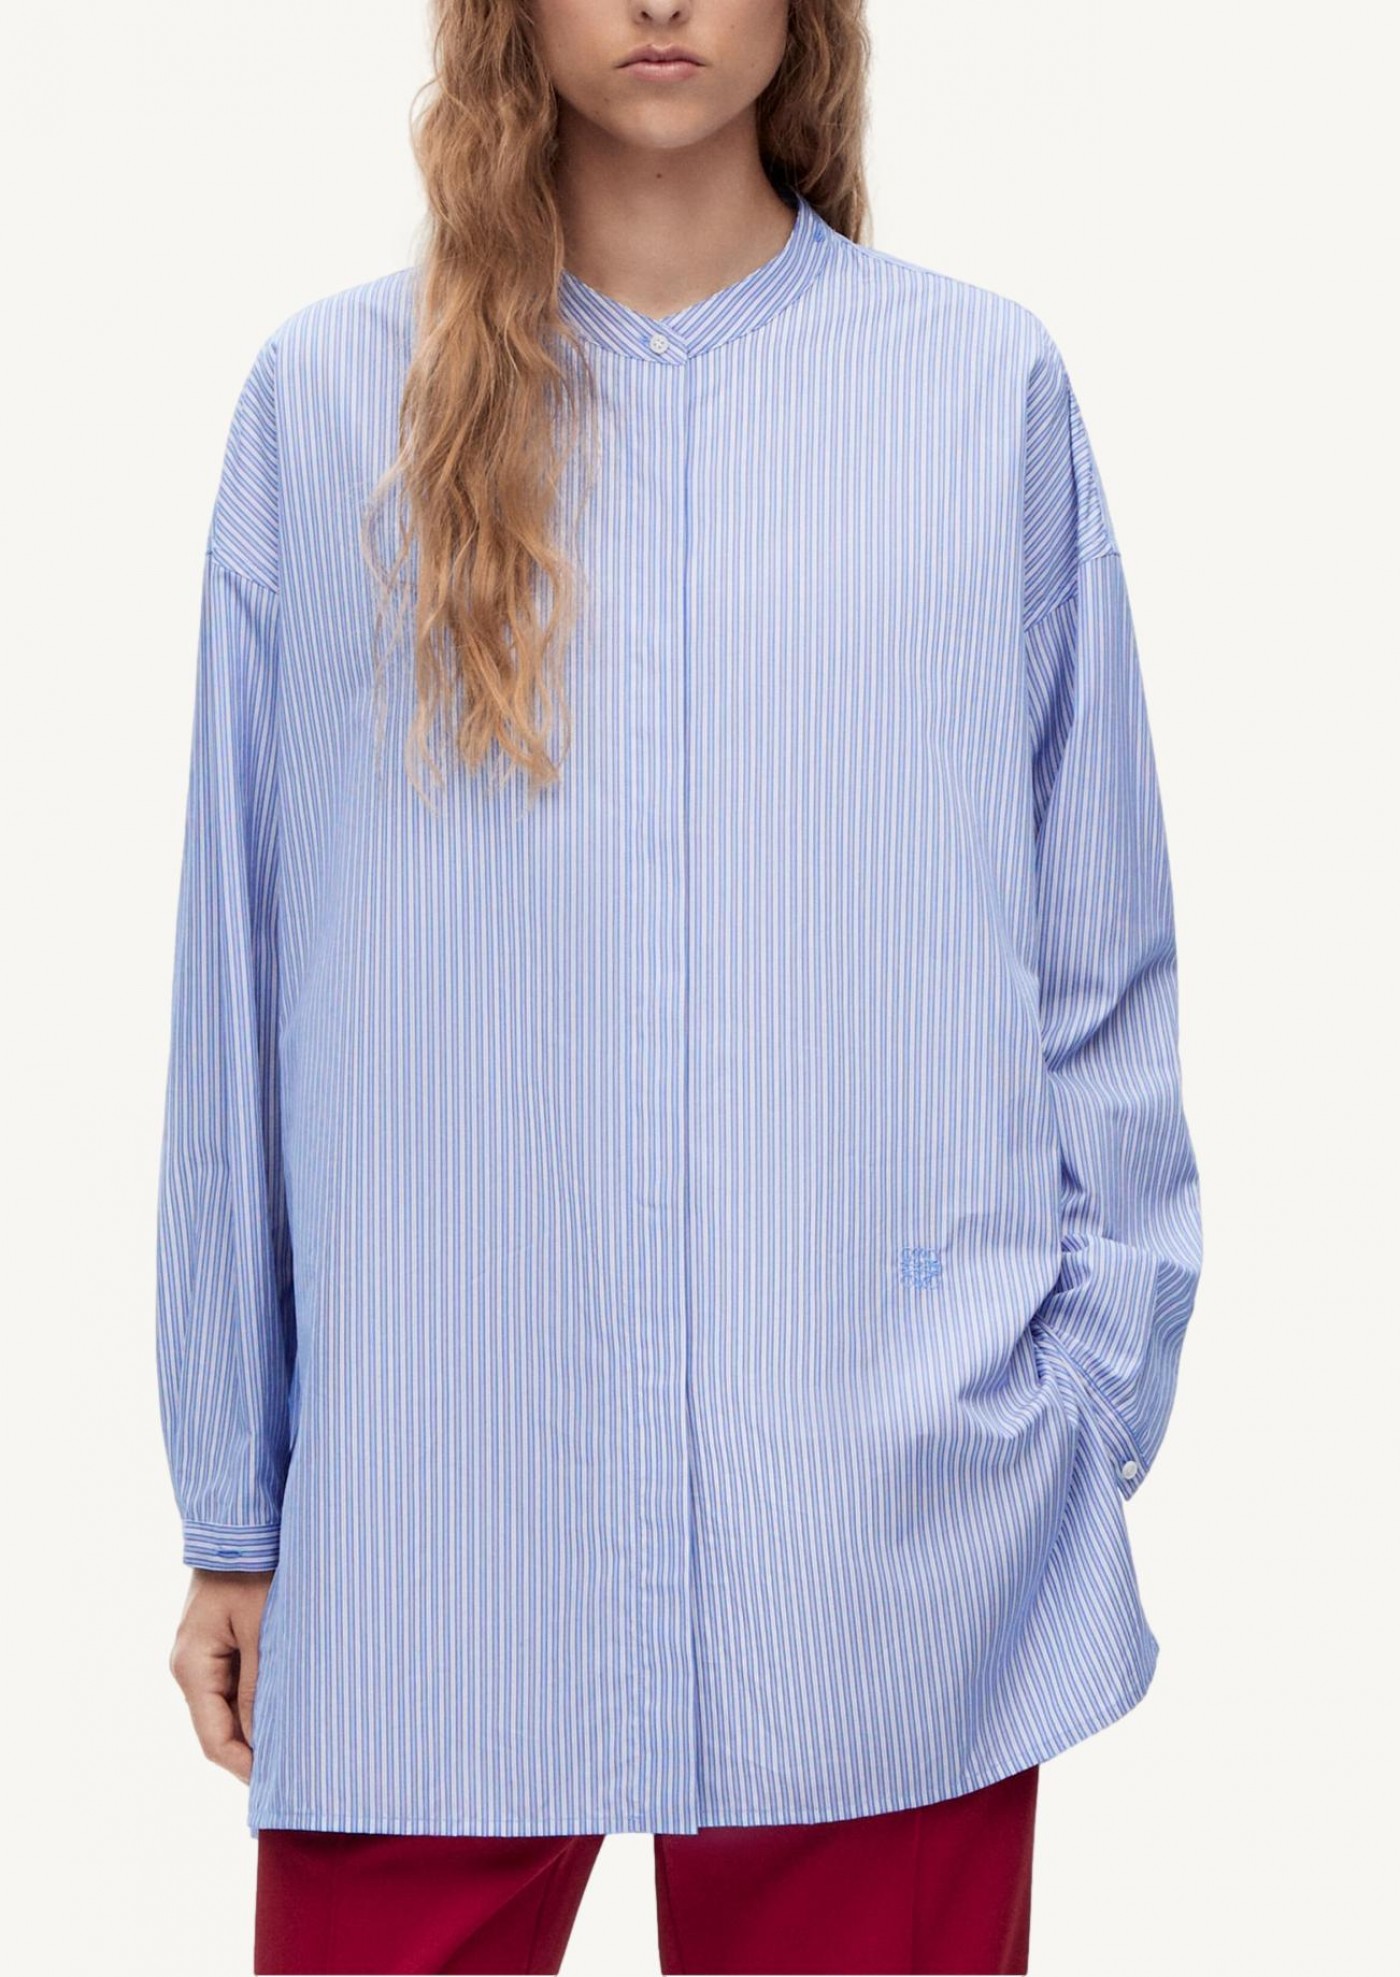 Deconstructed shirt in striped cotton - Loewe